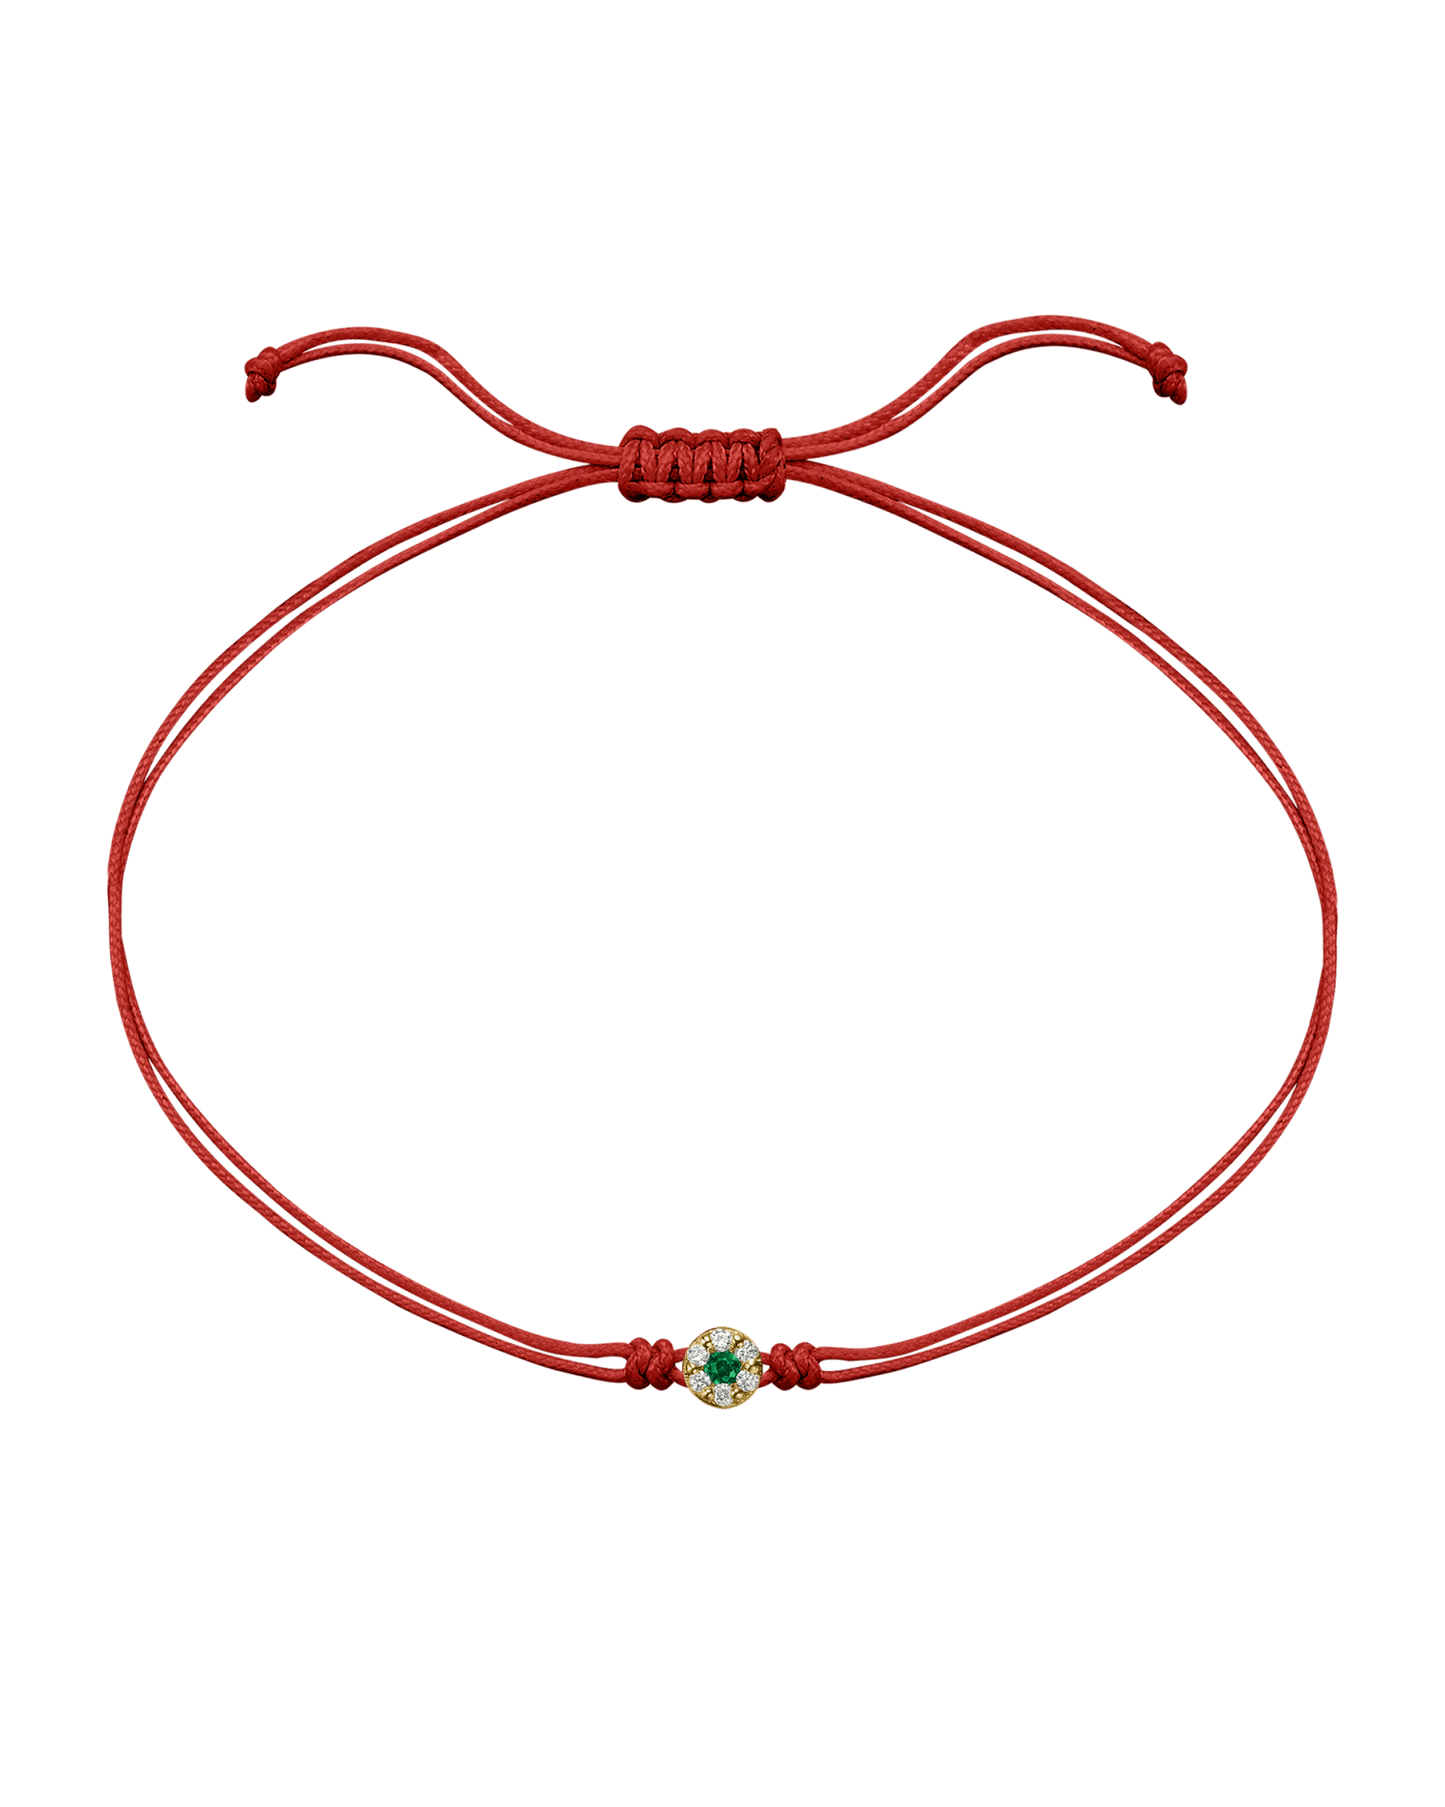 String of Love Diamond and Gemstone - 14K Yellow Gold Bracelet 14K Solid Gold Red Emerald 